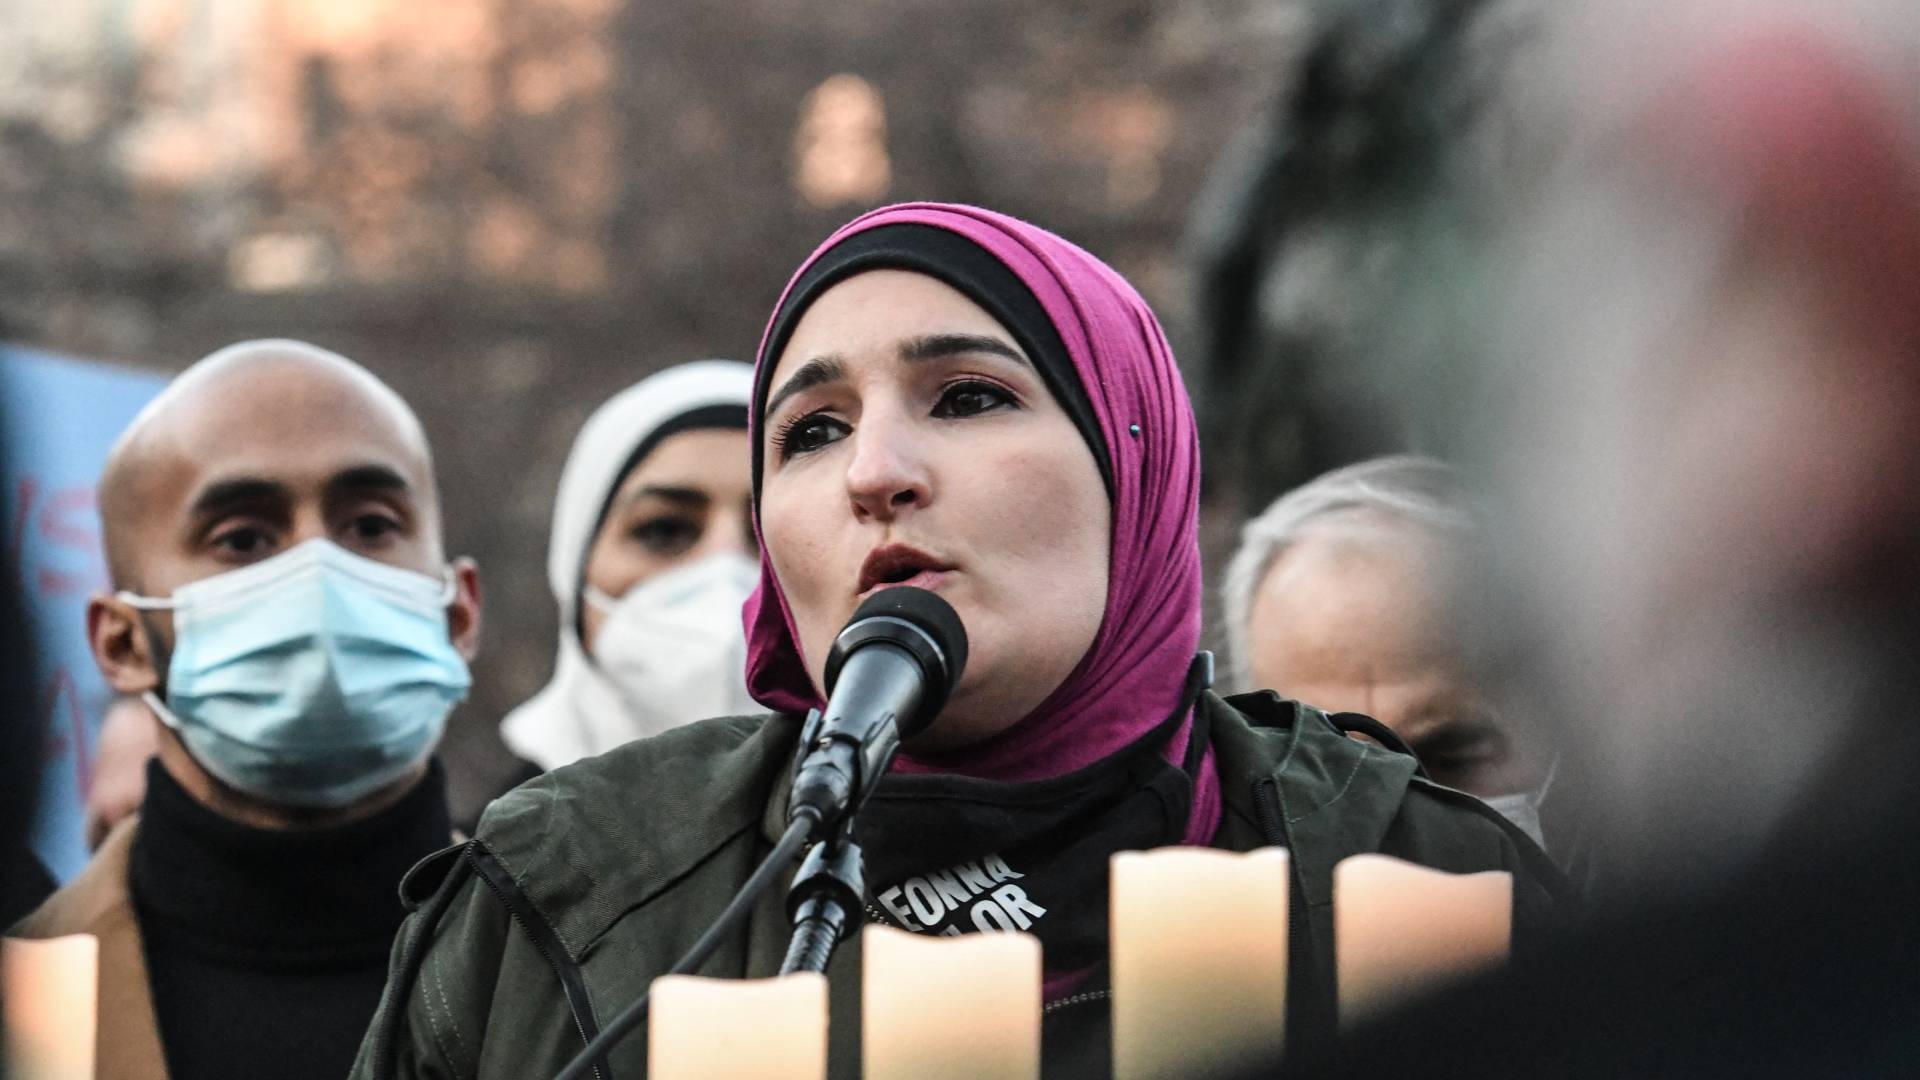 Linda Sarsour speaks during a press conference on 11 March 11, 2021 in Louisville, Kentucky ahead of the one year anniversary of Breonna Taylor's death during a no-knock raid executed by police.